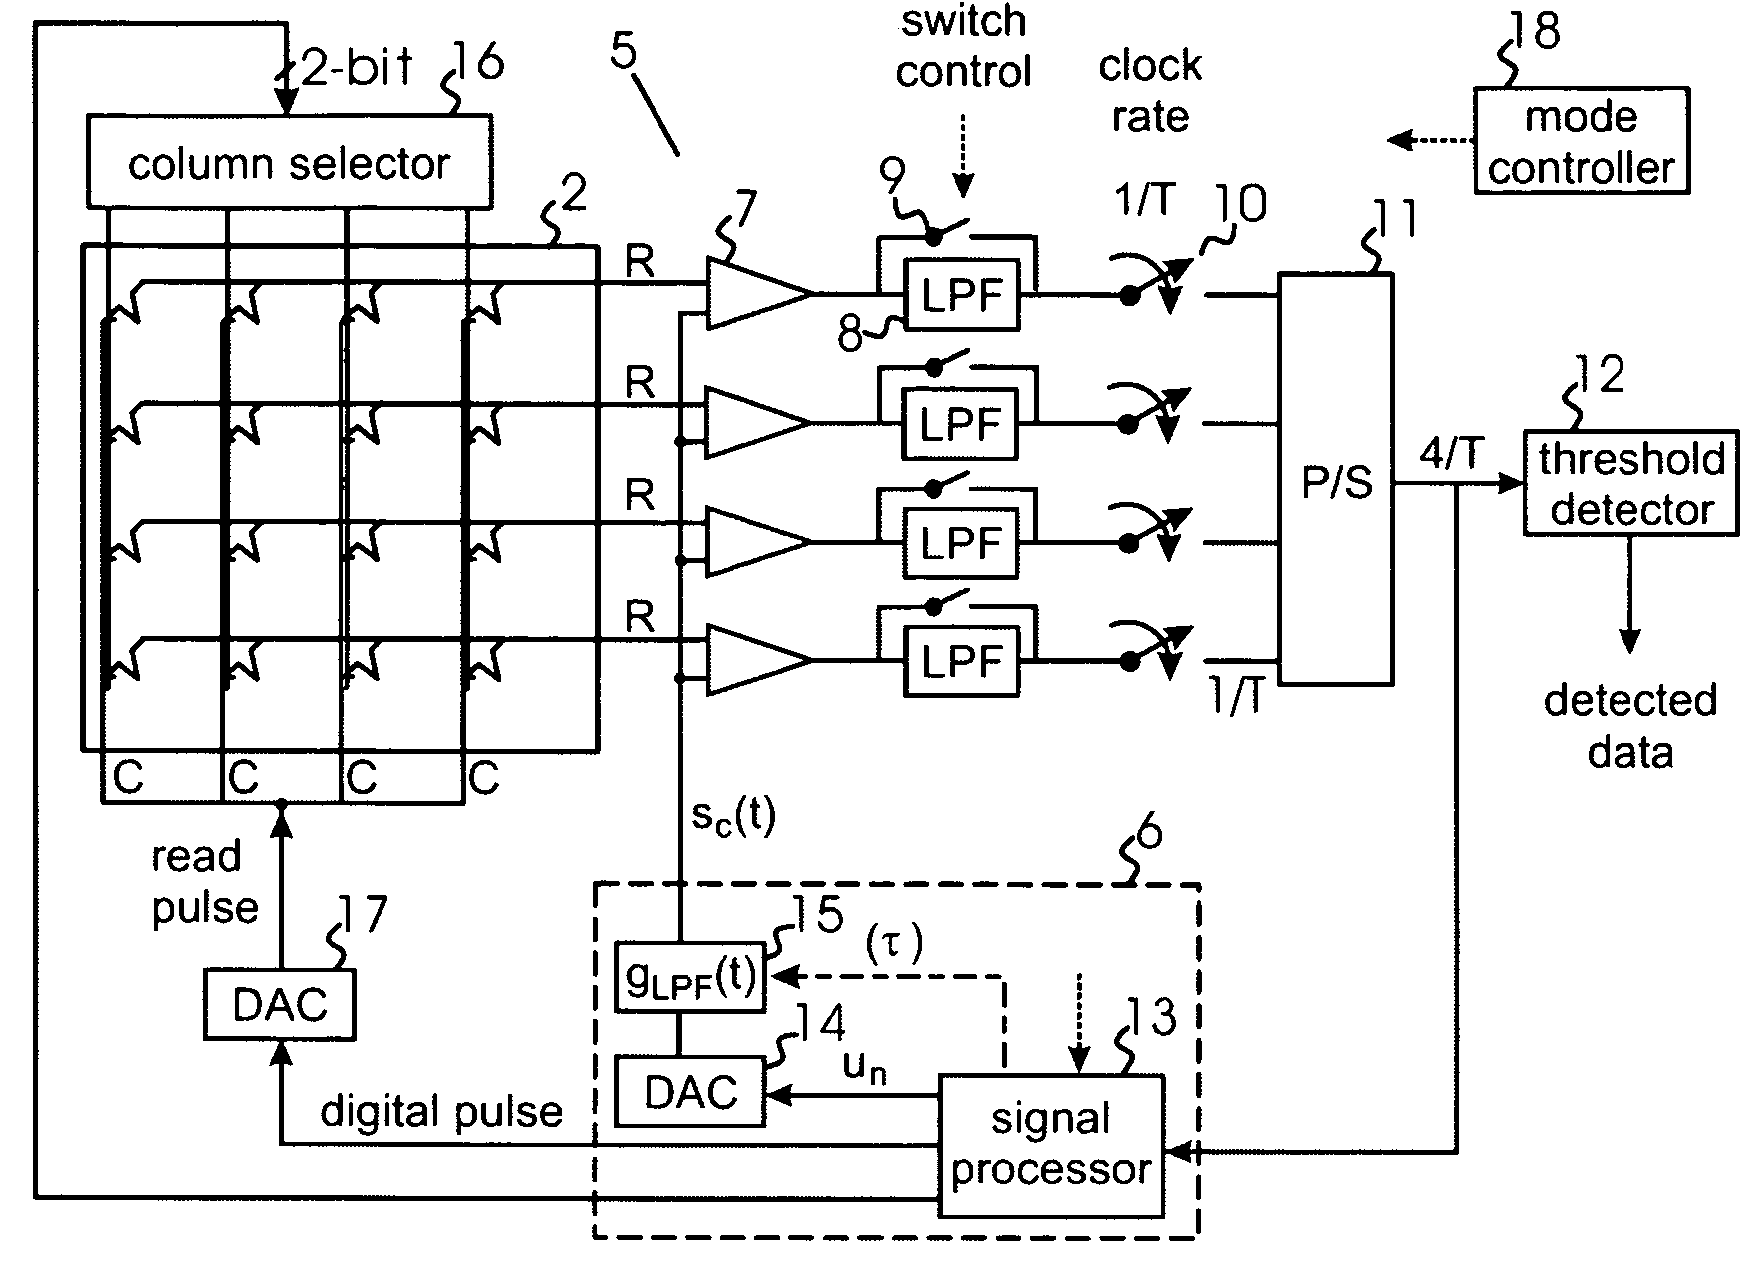 Offset compensation in local-probe data storage devices